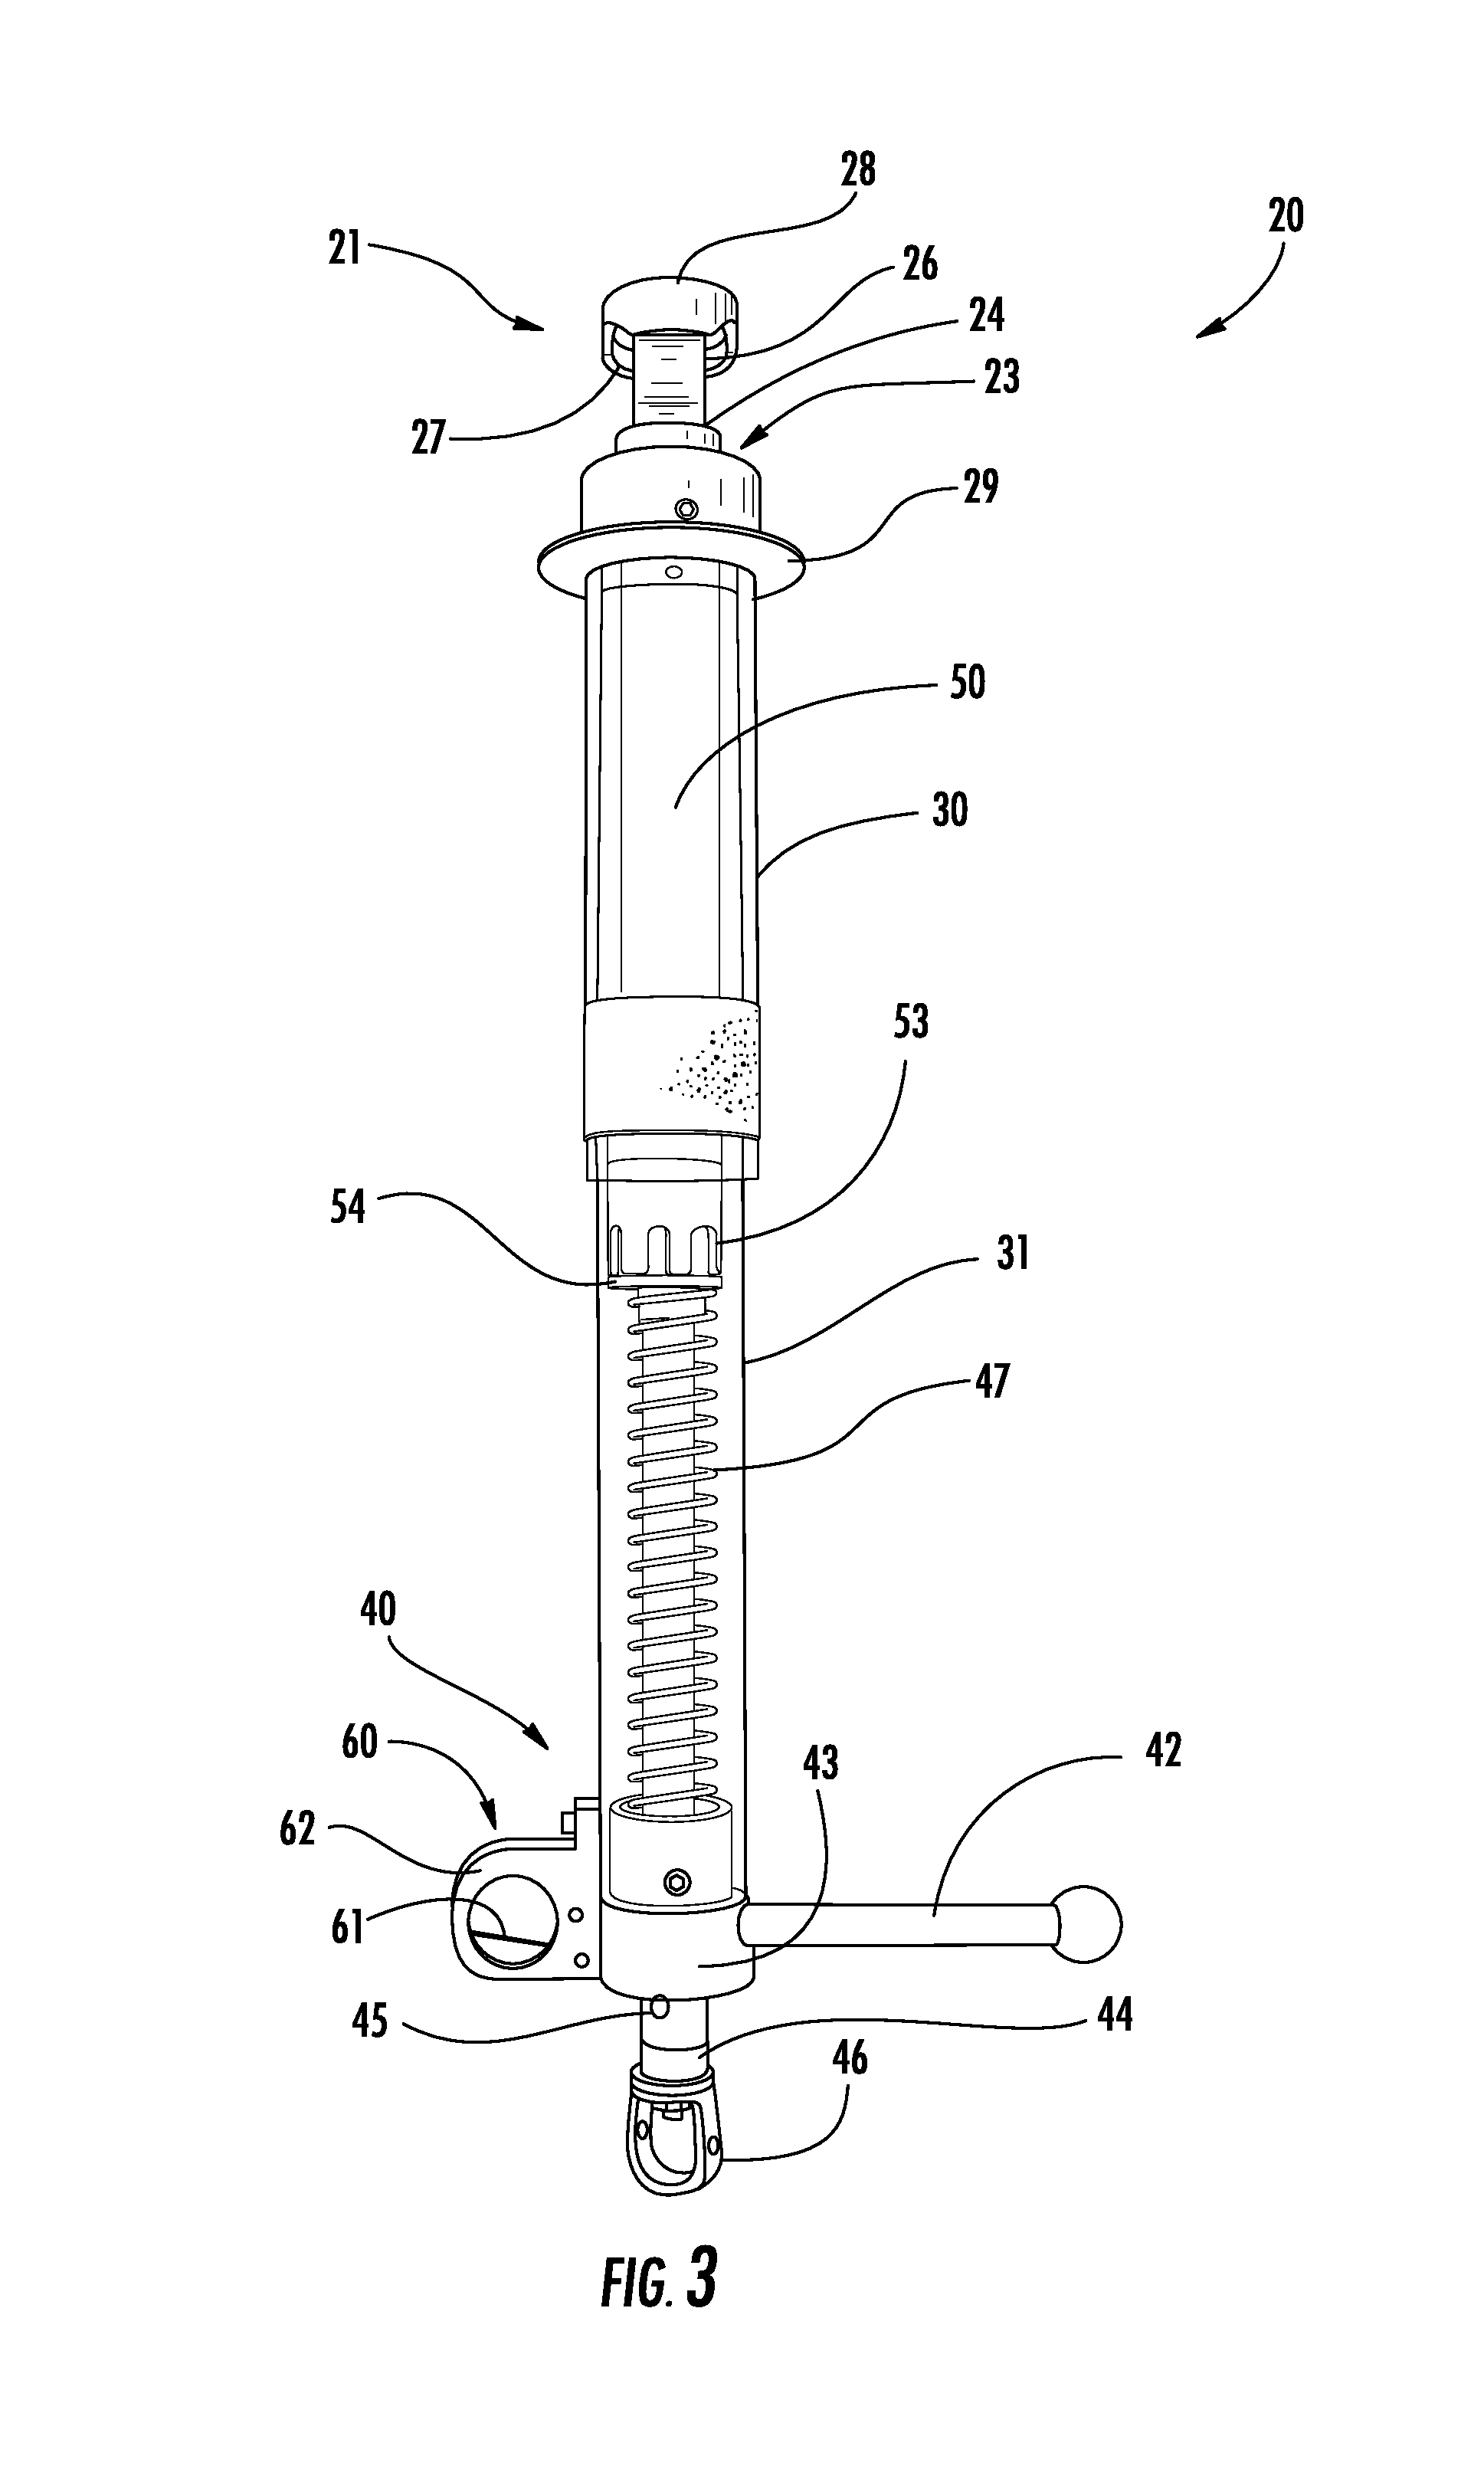 Portable load-breaking and pickup jumper apparatus